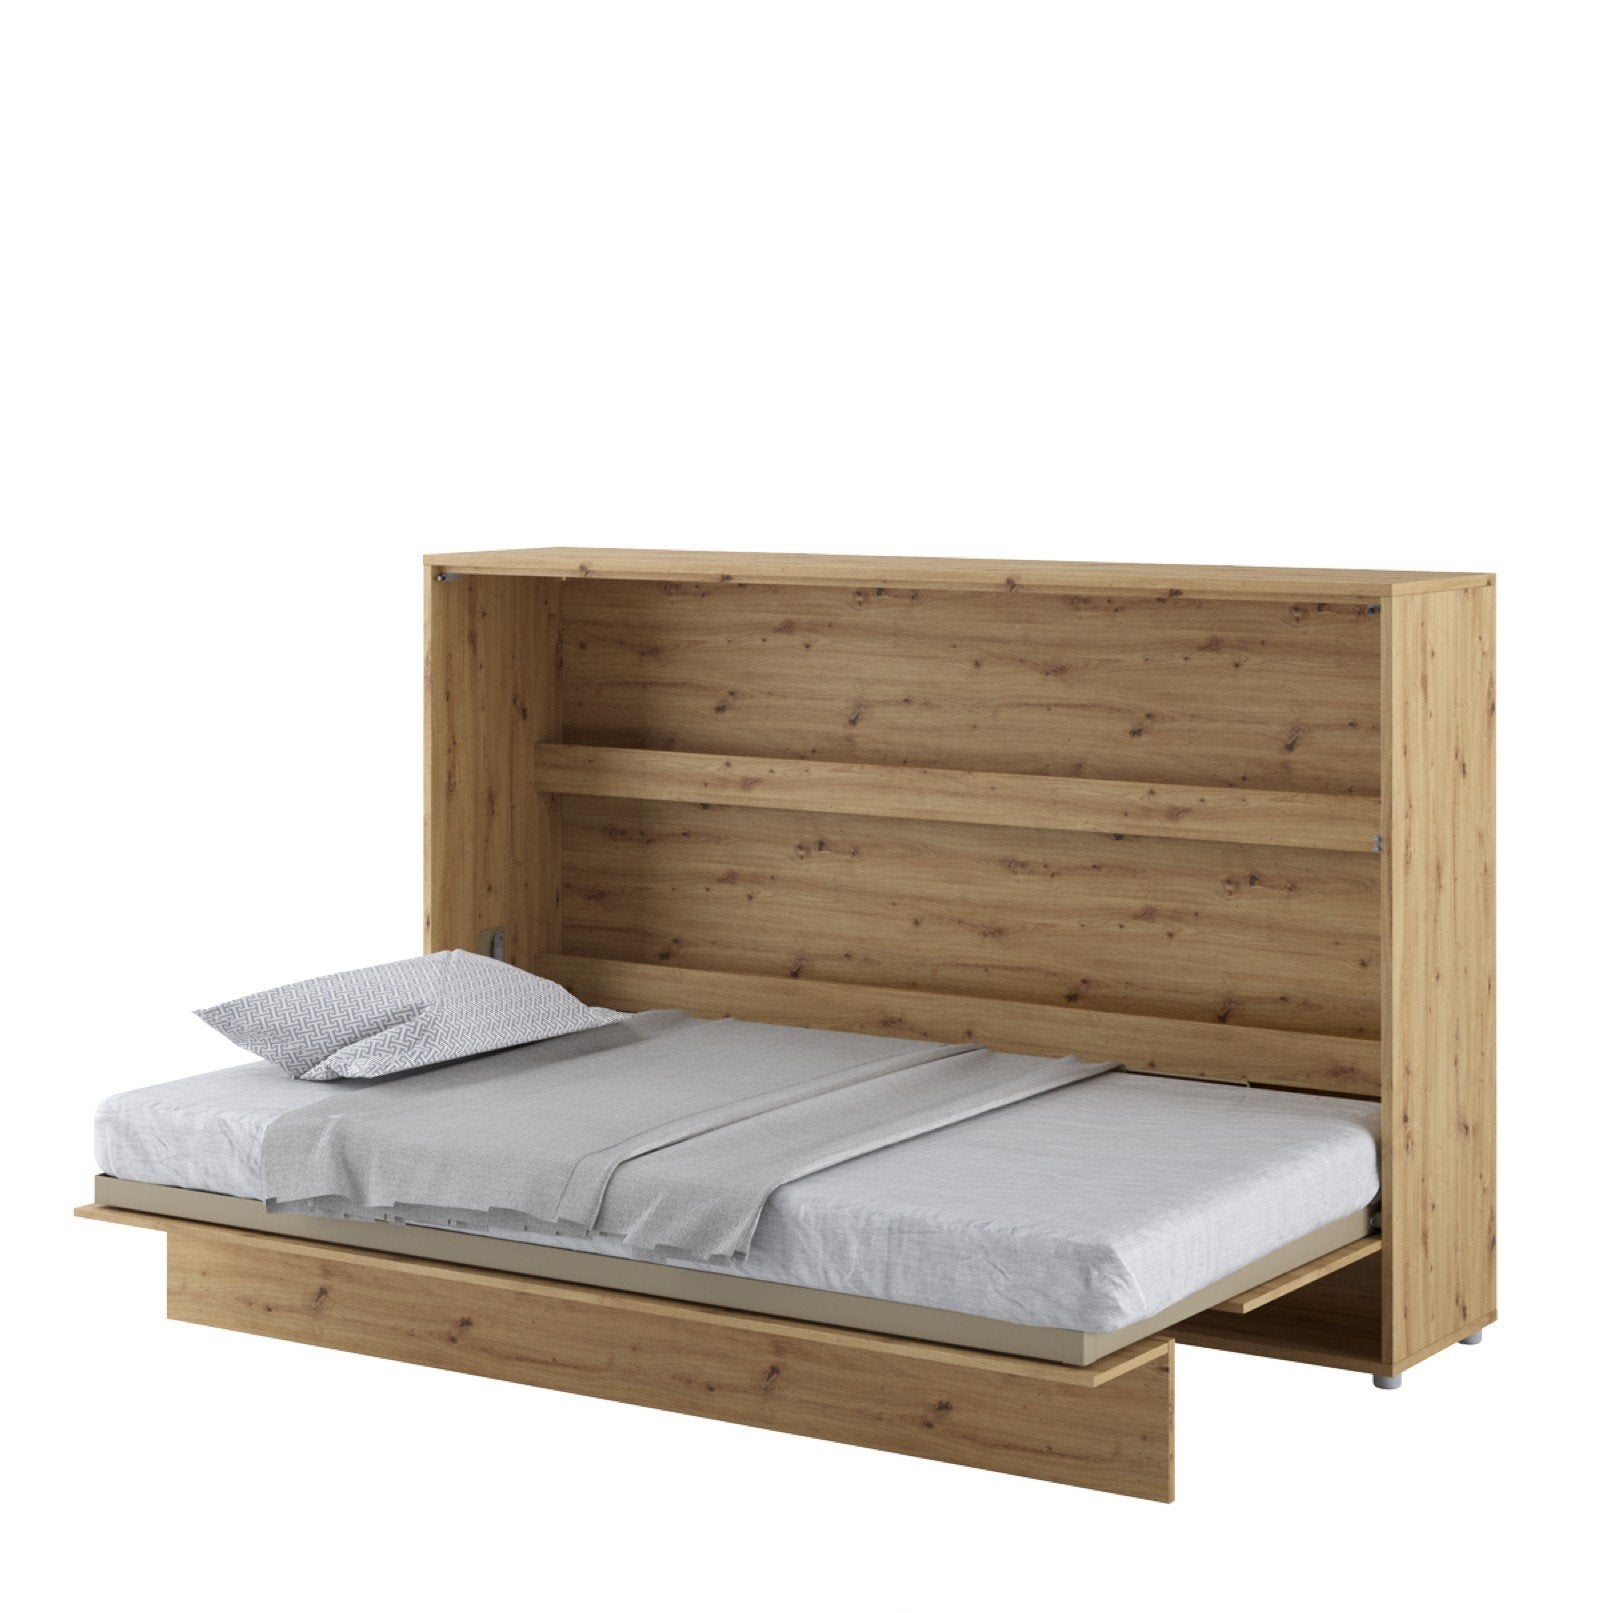 View BC05 Horizontal Wall Bed Concept 120cm Murphy Bed Oak Artisan 120 x 200cm information